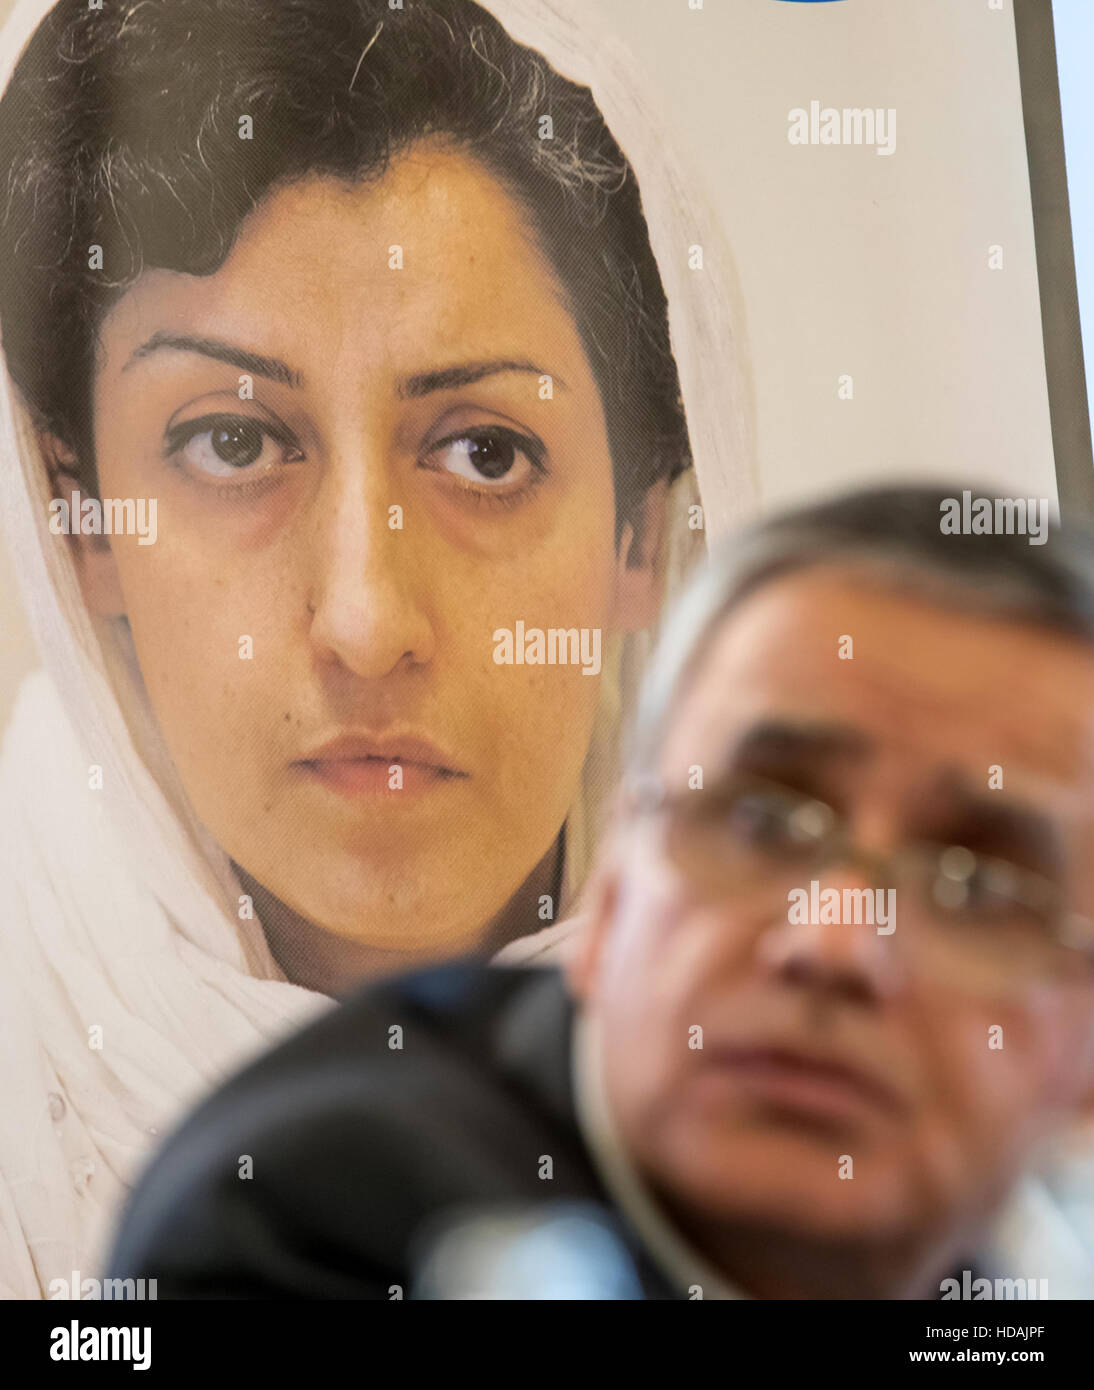 Weimar, Germany. 10th Dec, 2016. Taghi Rahmani representing his wife Narges Mohammadi from Iran, at a press conference for the Weimarer Menschenrechtspreis (Weimar Human Rights Award), in Weimar, Germany, 10 December 2016. Narges Mohammadi was vice president of the now banned human rights organisation Defenders of Human Rights and is currently serving a jail sentence. Photo: Arifoto Ug/Michael Reichel/dpa/Alamy Live News Stock Photo